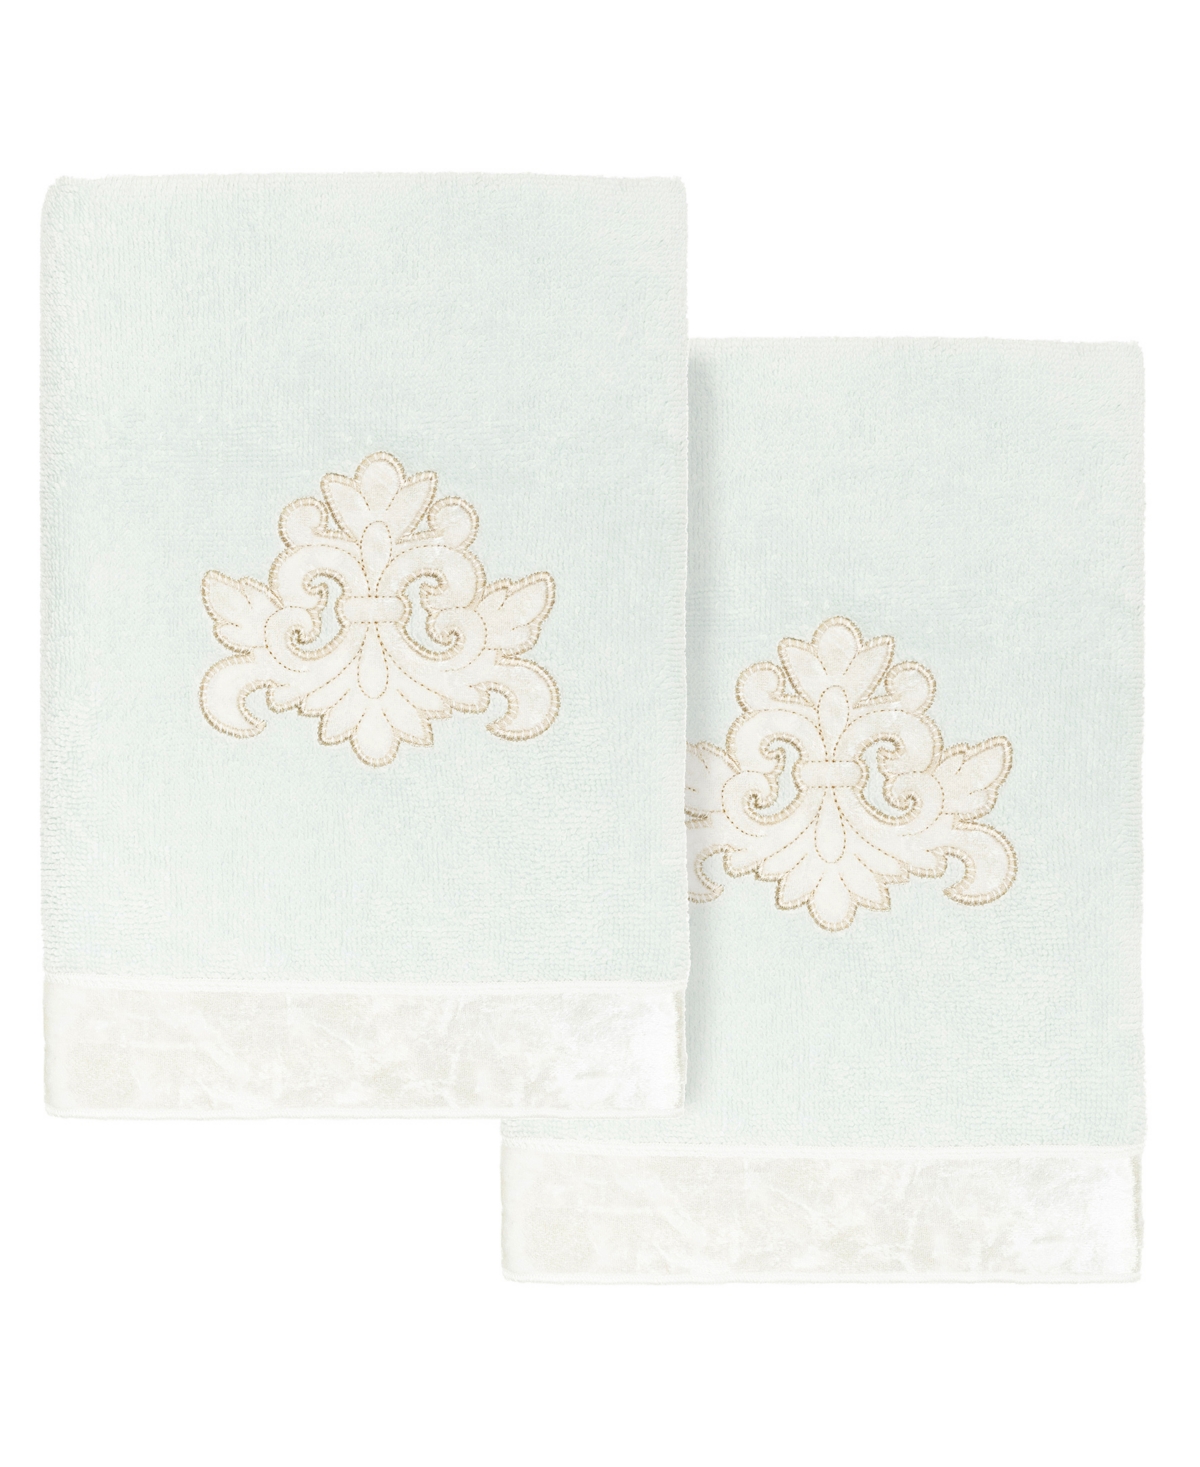 Linum Home Textiles Turkish Cotton May Embellished Hand Towel Set, 2 Piece Bedding In Aqua